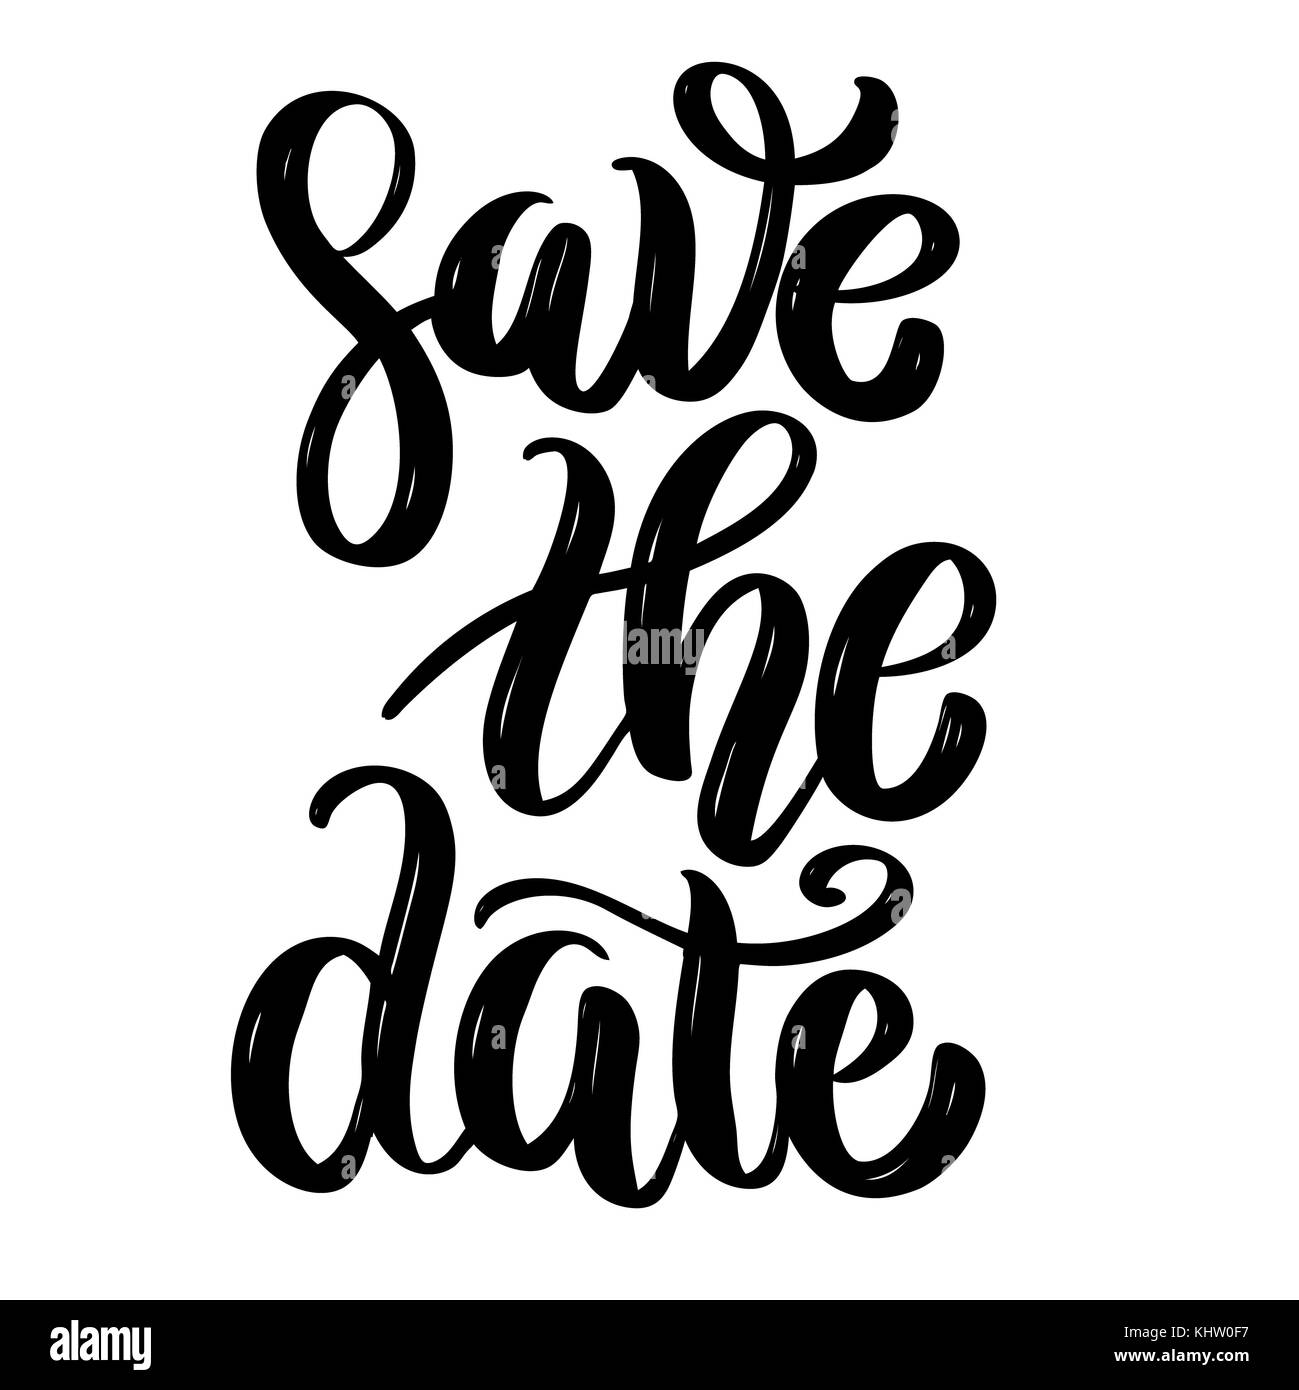 Save the date. Hand drawn motivation lettering quote. Design element for poster, banner, greeting card. Vector illustration Stock Photo